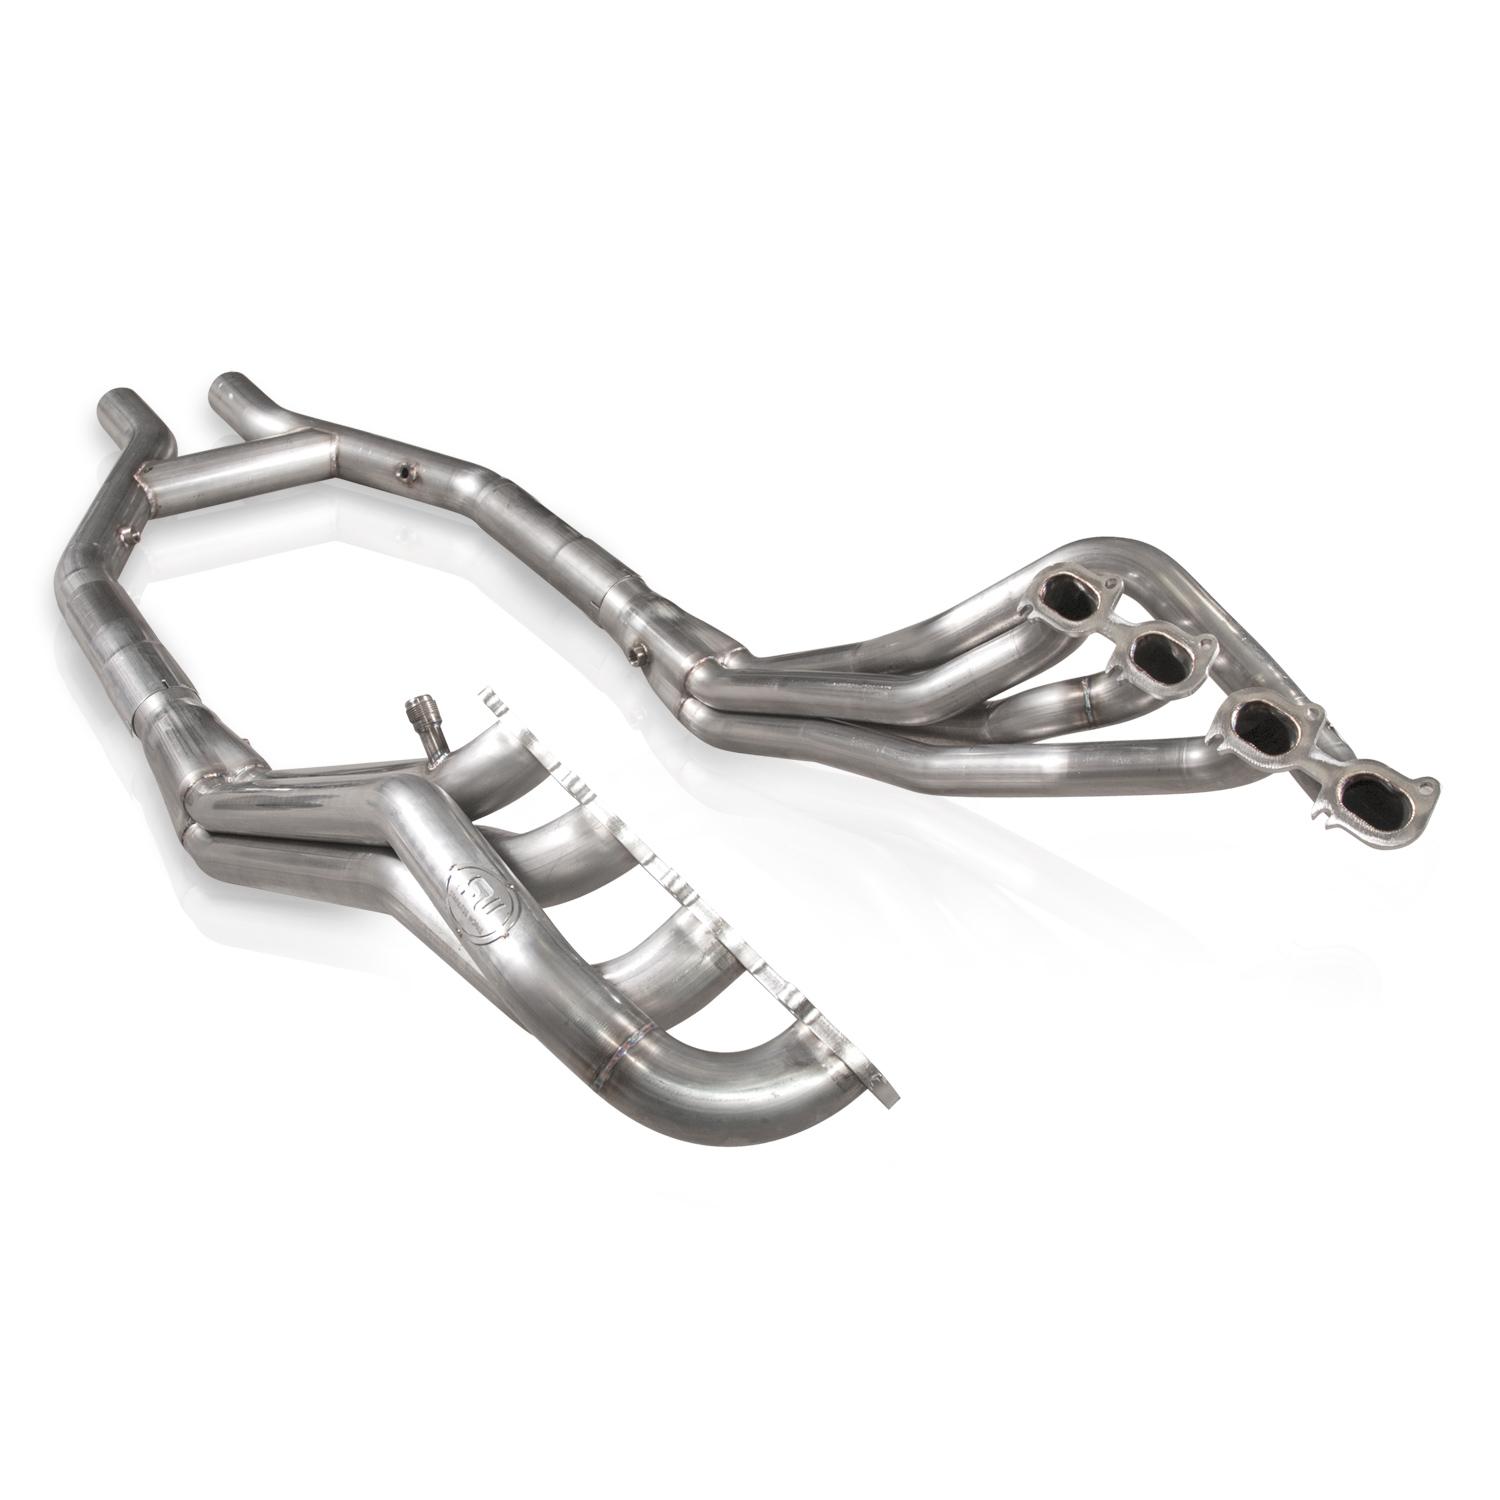 2007-2014 Ford Mustang GT500 Stainless Works 1 7/8" Long Tube Headers w/3" Collectors & 3" Offroad Hpipe